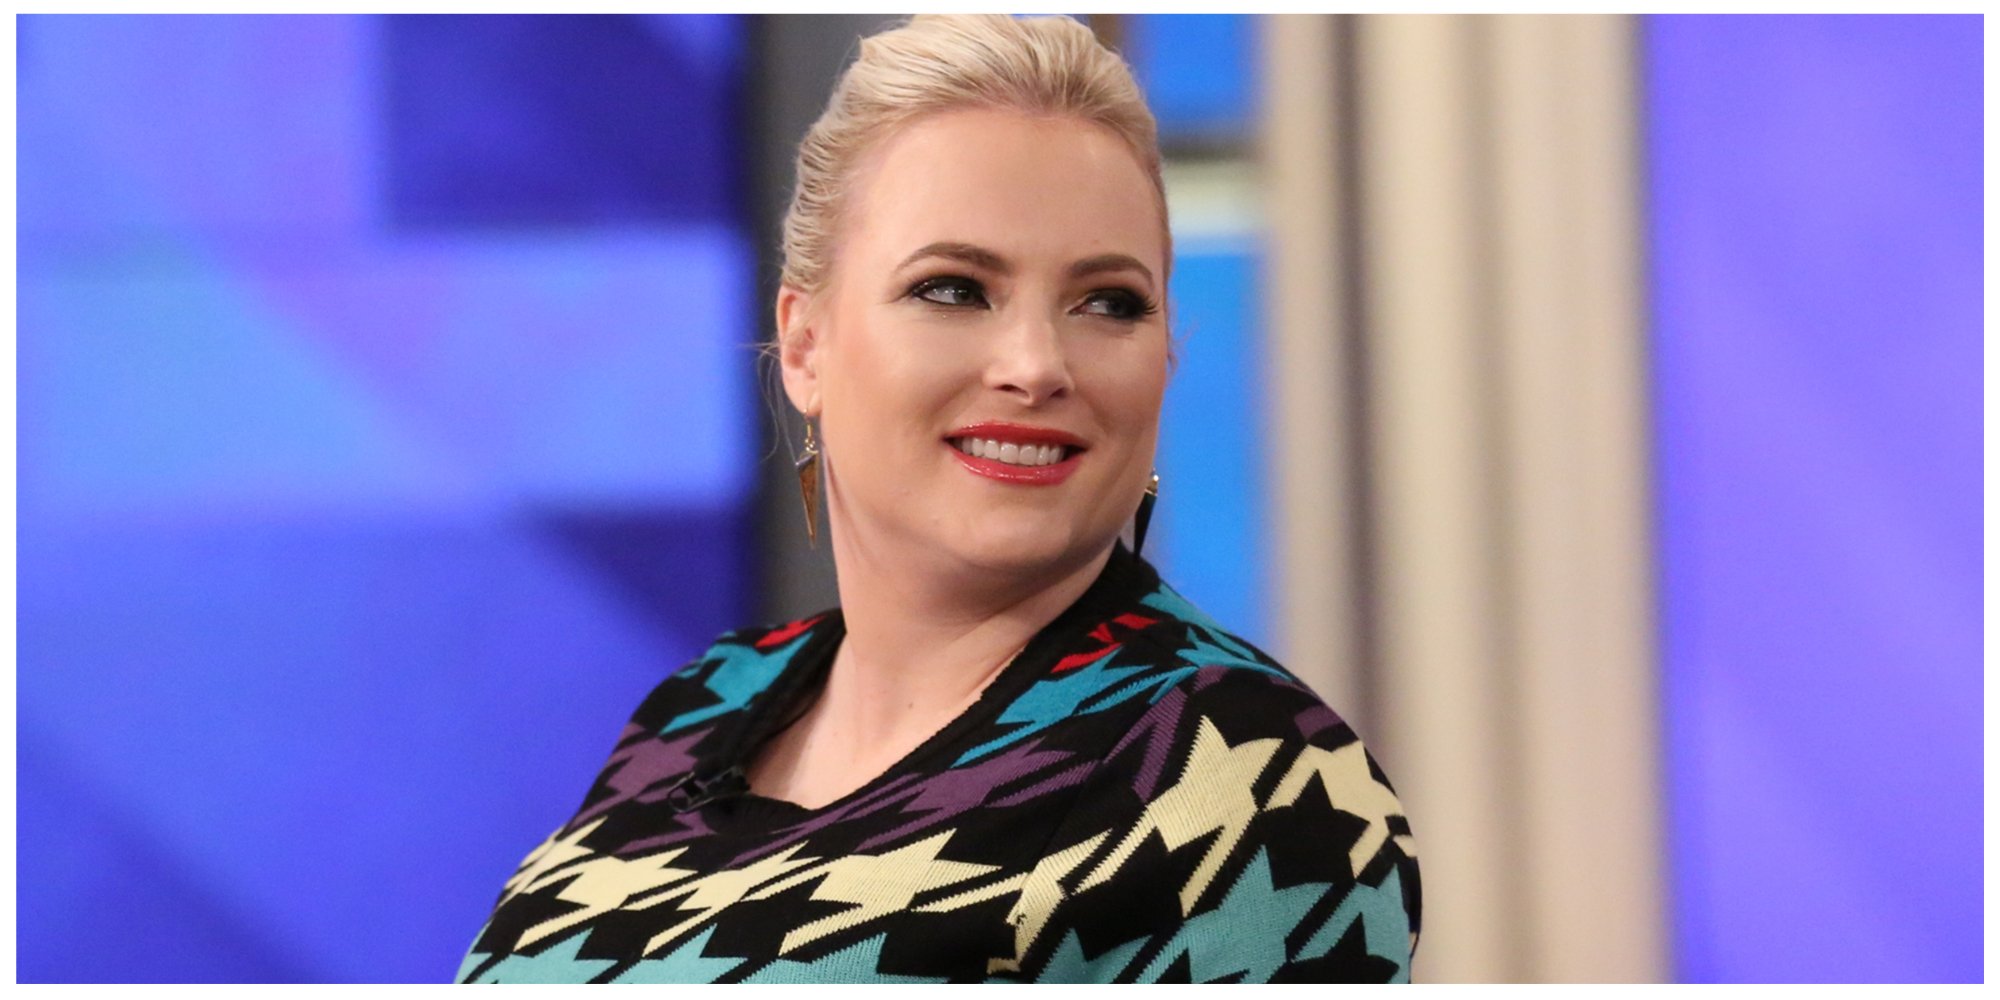 ‘The View’: Meghan McCain Puts Show on Blast, Claims It Took ‘Two People to Replace Me’